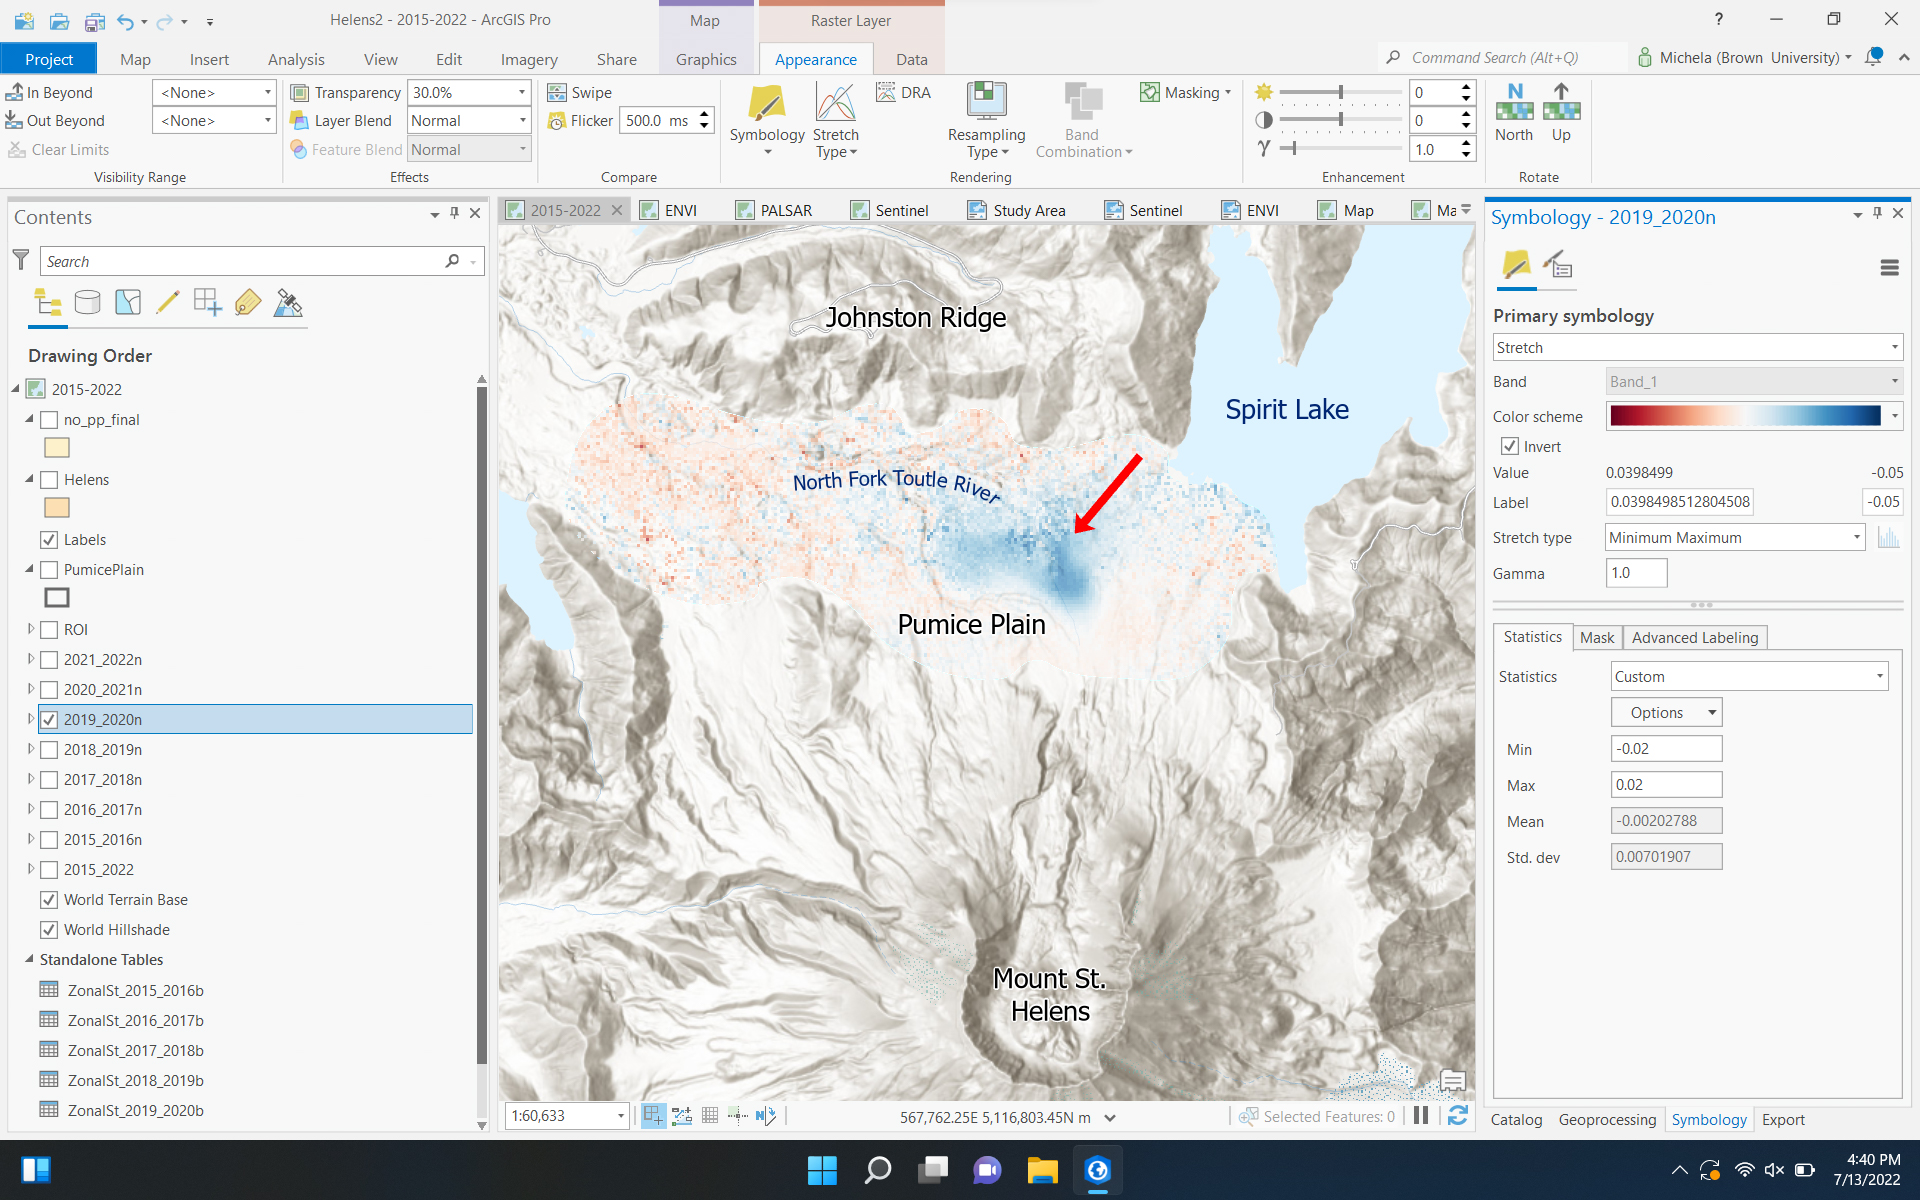 GIS displacement map created by RESESS Satellite Intern Michela Savignano of the area surrounding Mount St. Helens. A red arrow points to the Pumice Plain, located just below North Fork Toutle River, Spirit Lake, and Johnston Ridge.